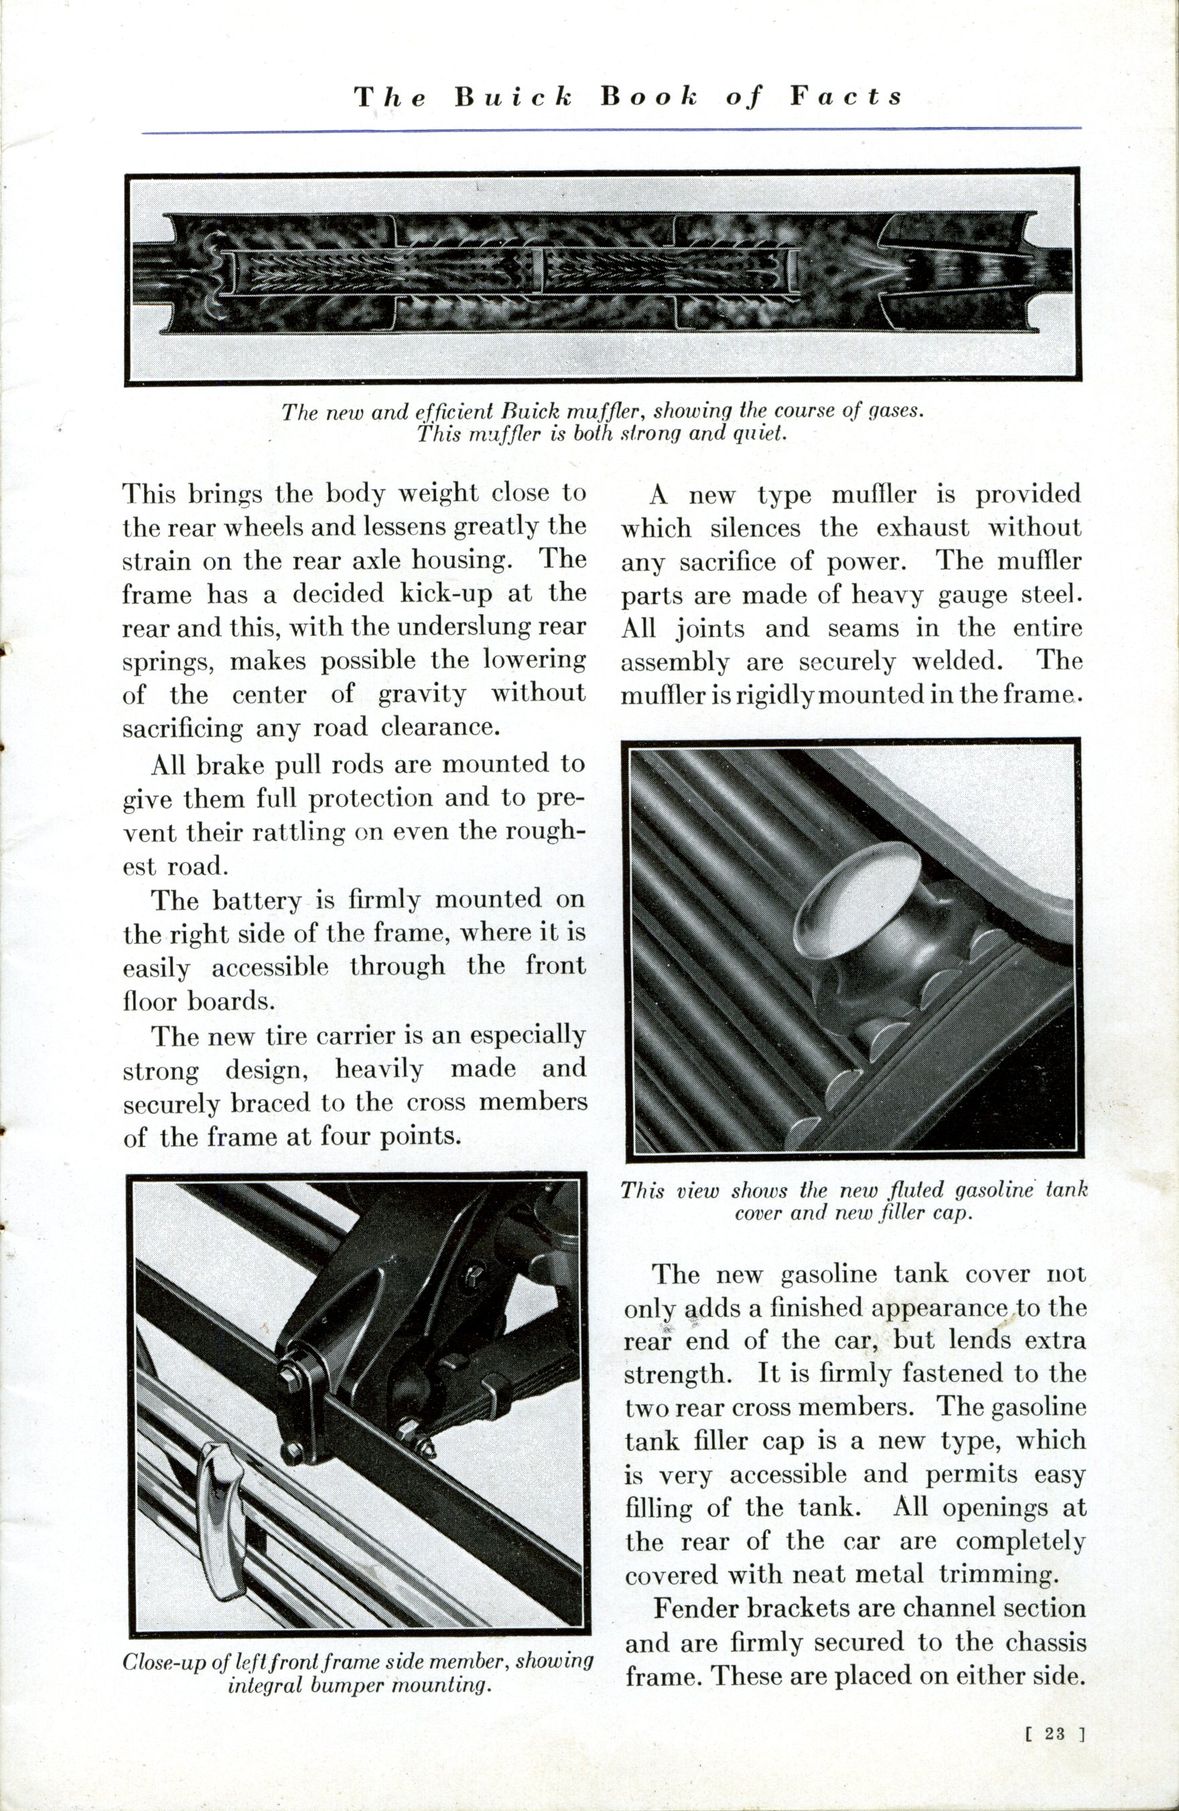 1930 Buick Book of Facts-23